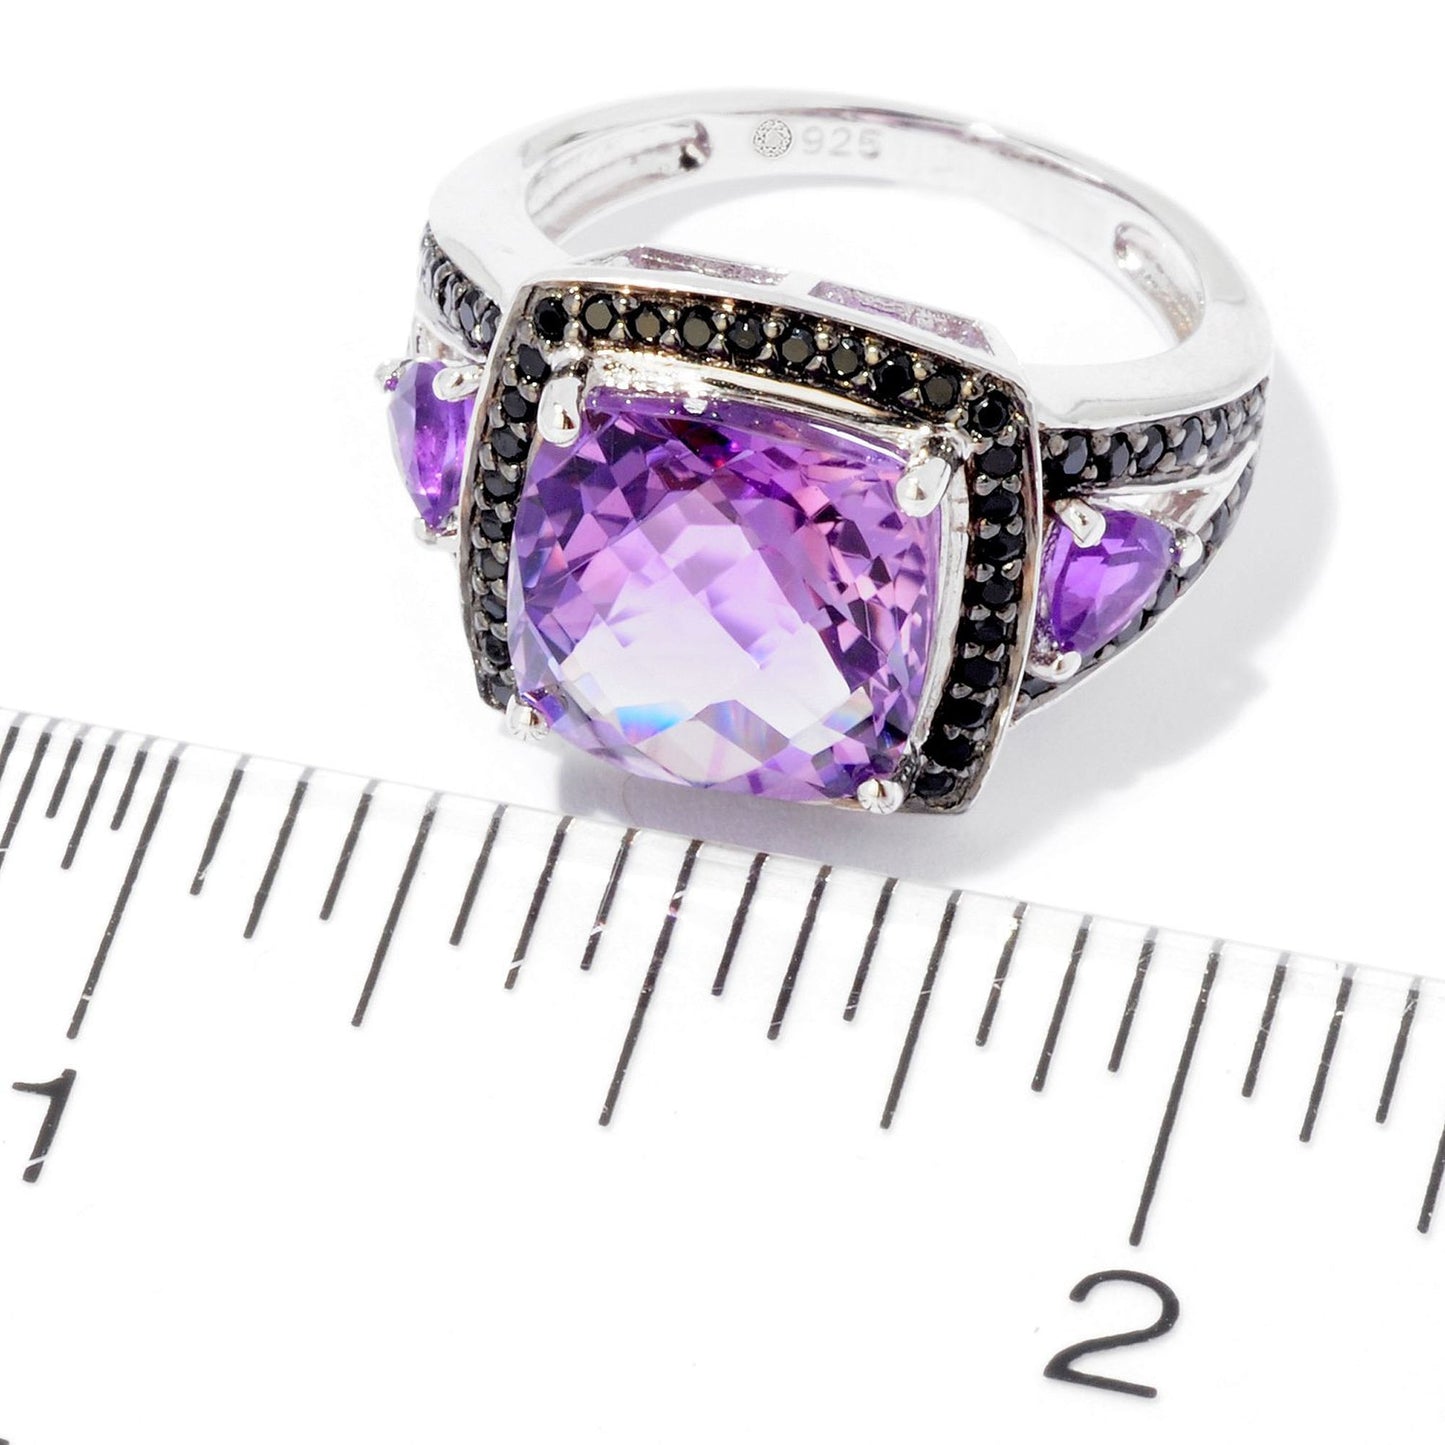 Pinctore SS/ 5.40ctw African Amethyst & Black Spinel Solitaire w/Accent Ring, Size 7